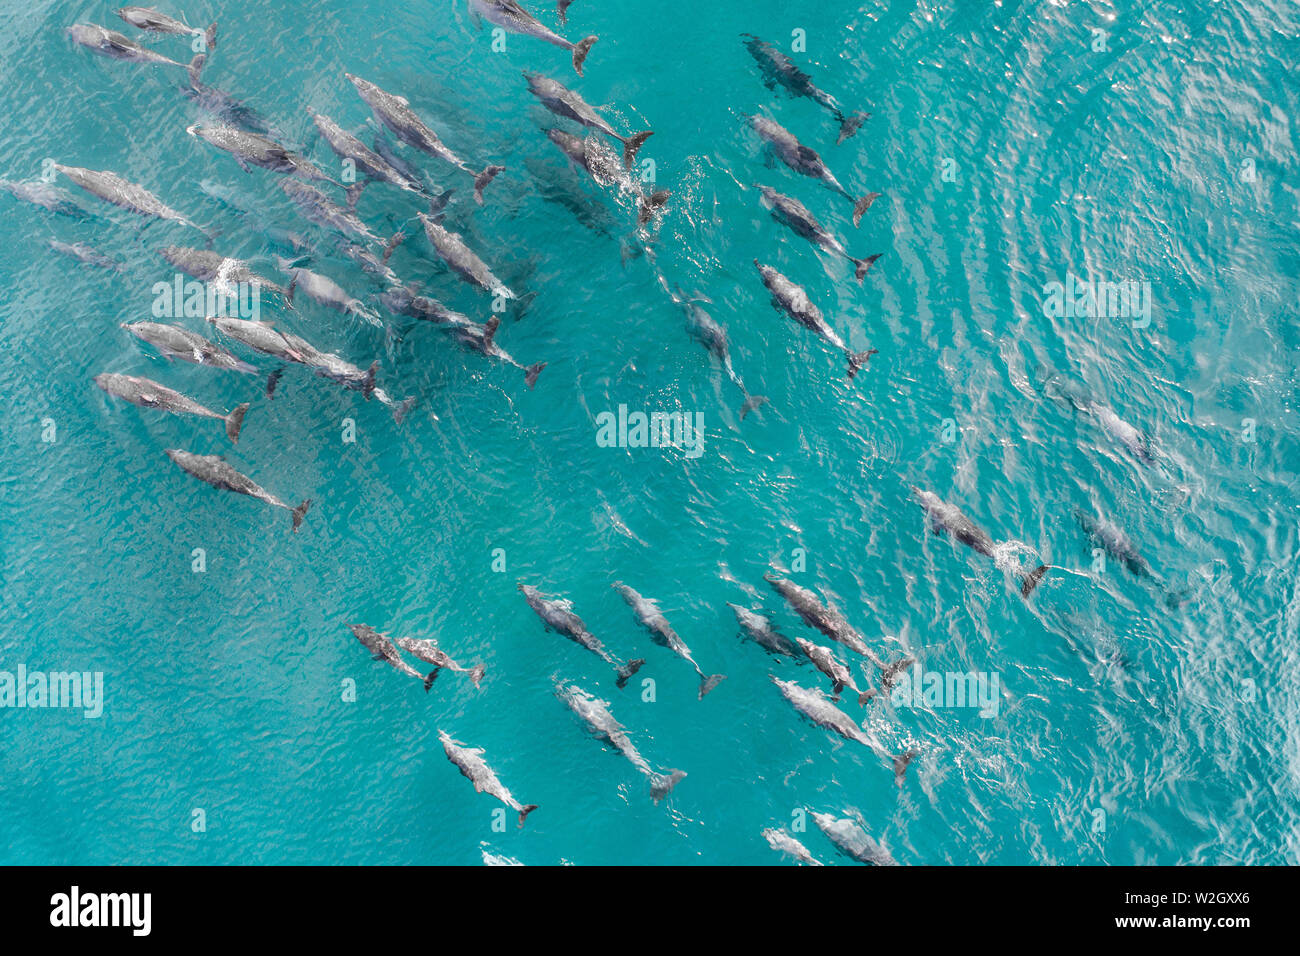 Aerial shot of a squad, school of dolphins cruising in the warm tropical water. Beautiful aerial of a large group of dolphins in blue turquoise water Stock Photo